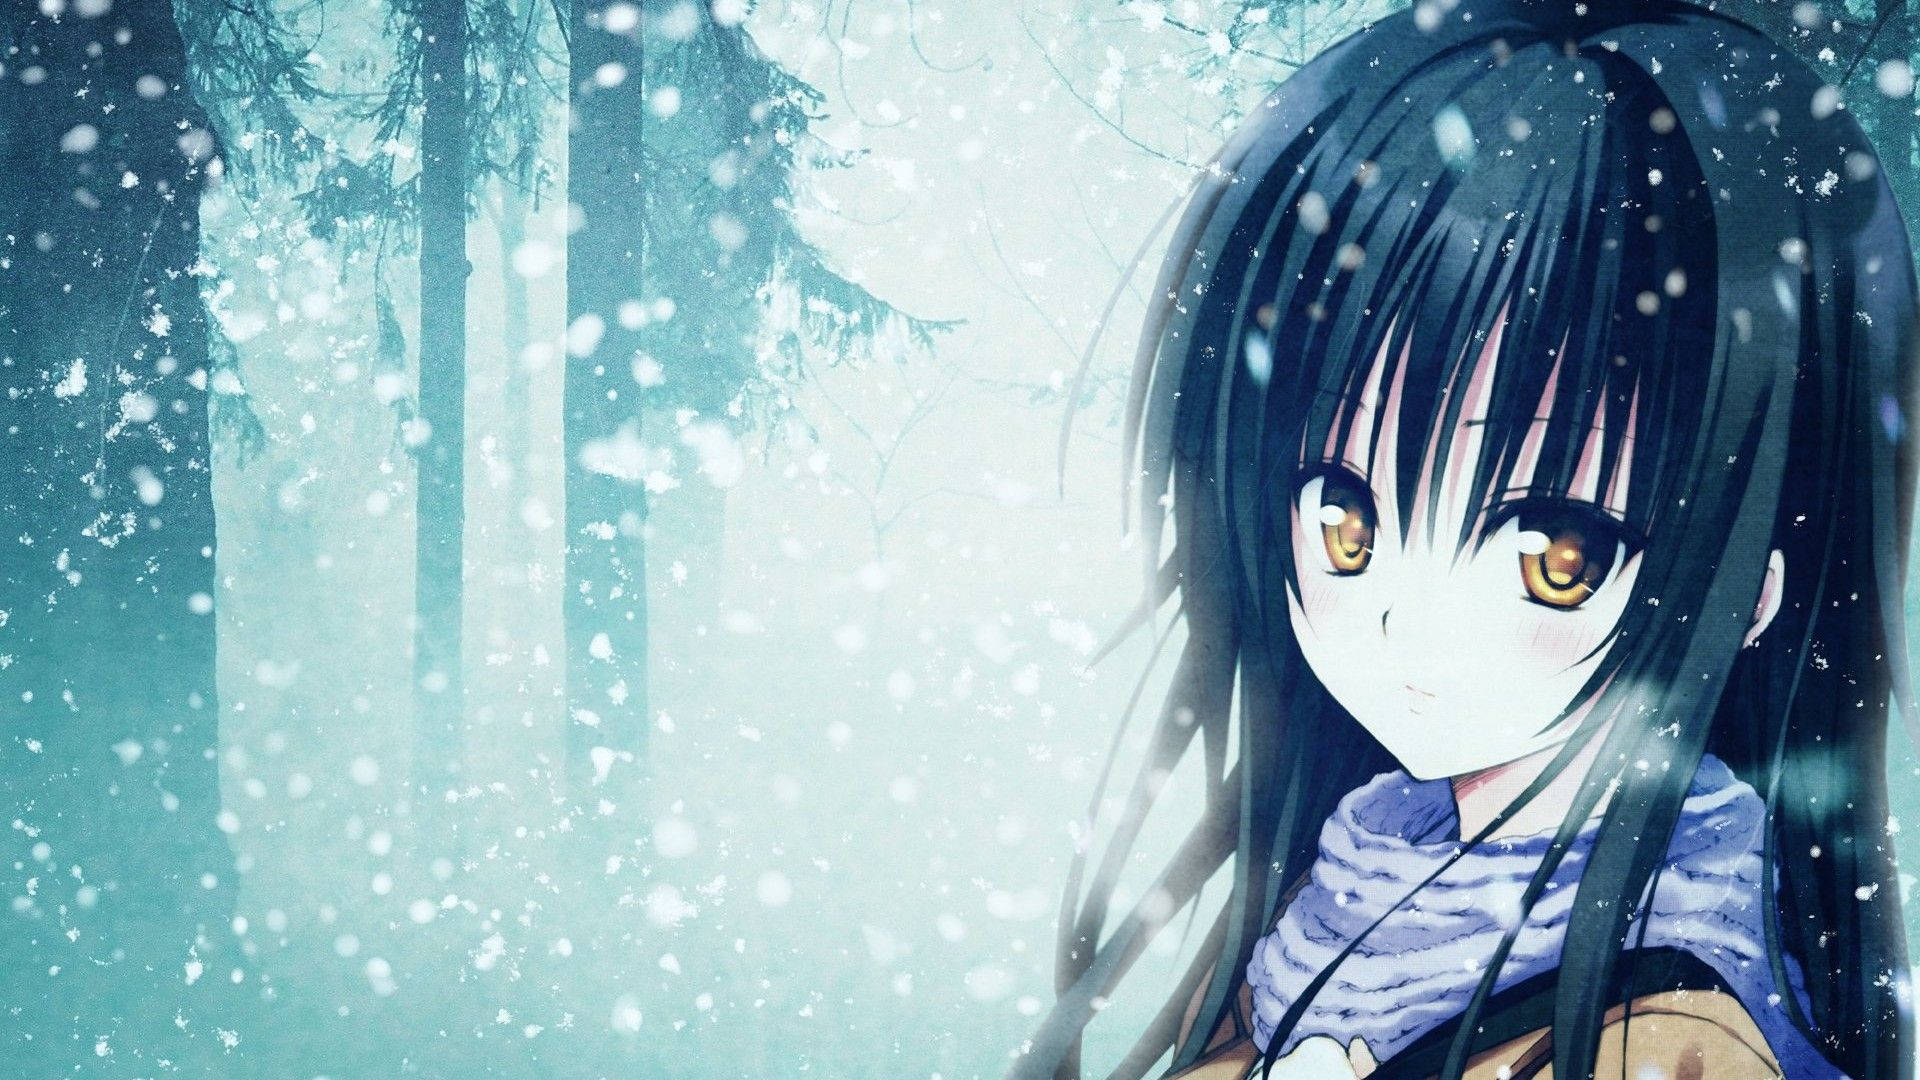 Anime Girl Sad Alone In Snowy Forest Background